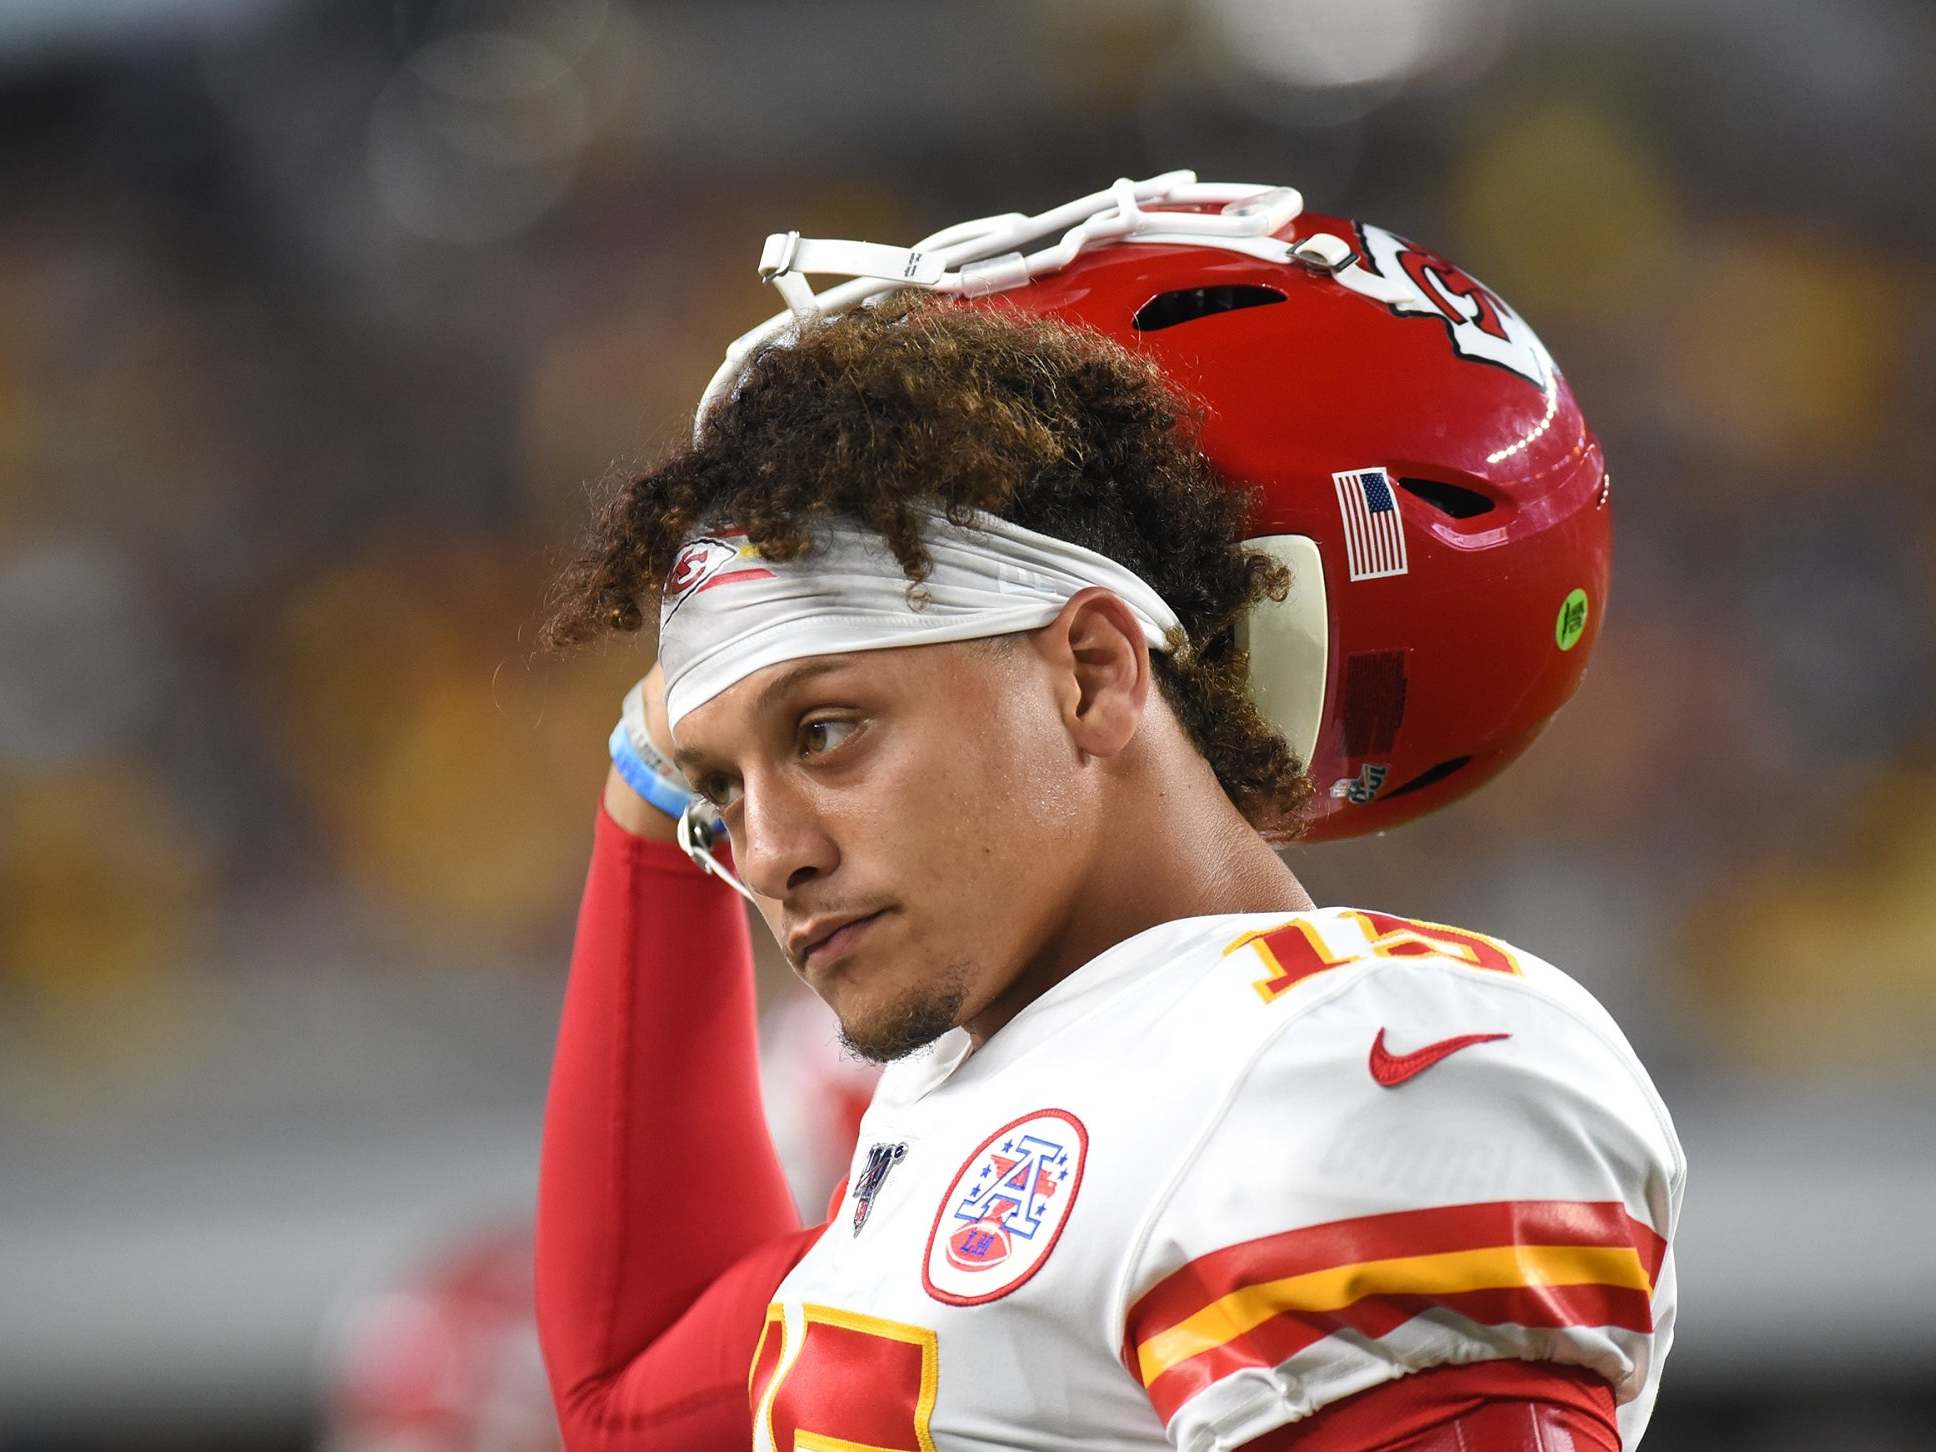 Nfl 2019 10 Predictions Ahead Of New Season Including Patrick Mahomes Tom Brady Ezekiel Elliott And More The Independent The Independent